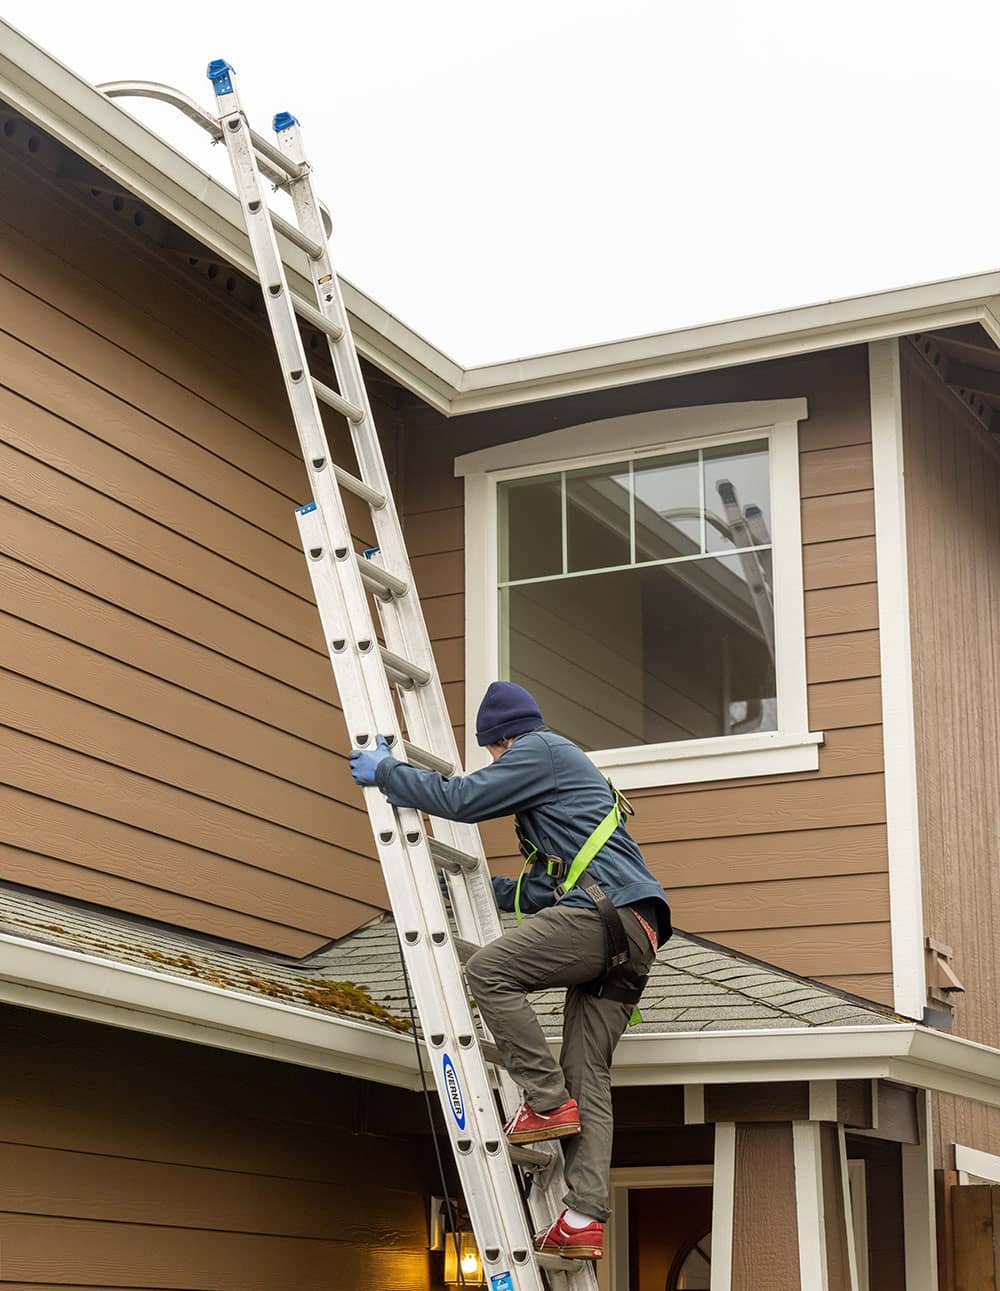 gutter cleaning professional climbing ladder to clean gutters